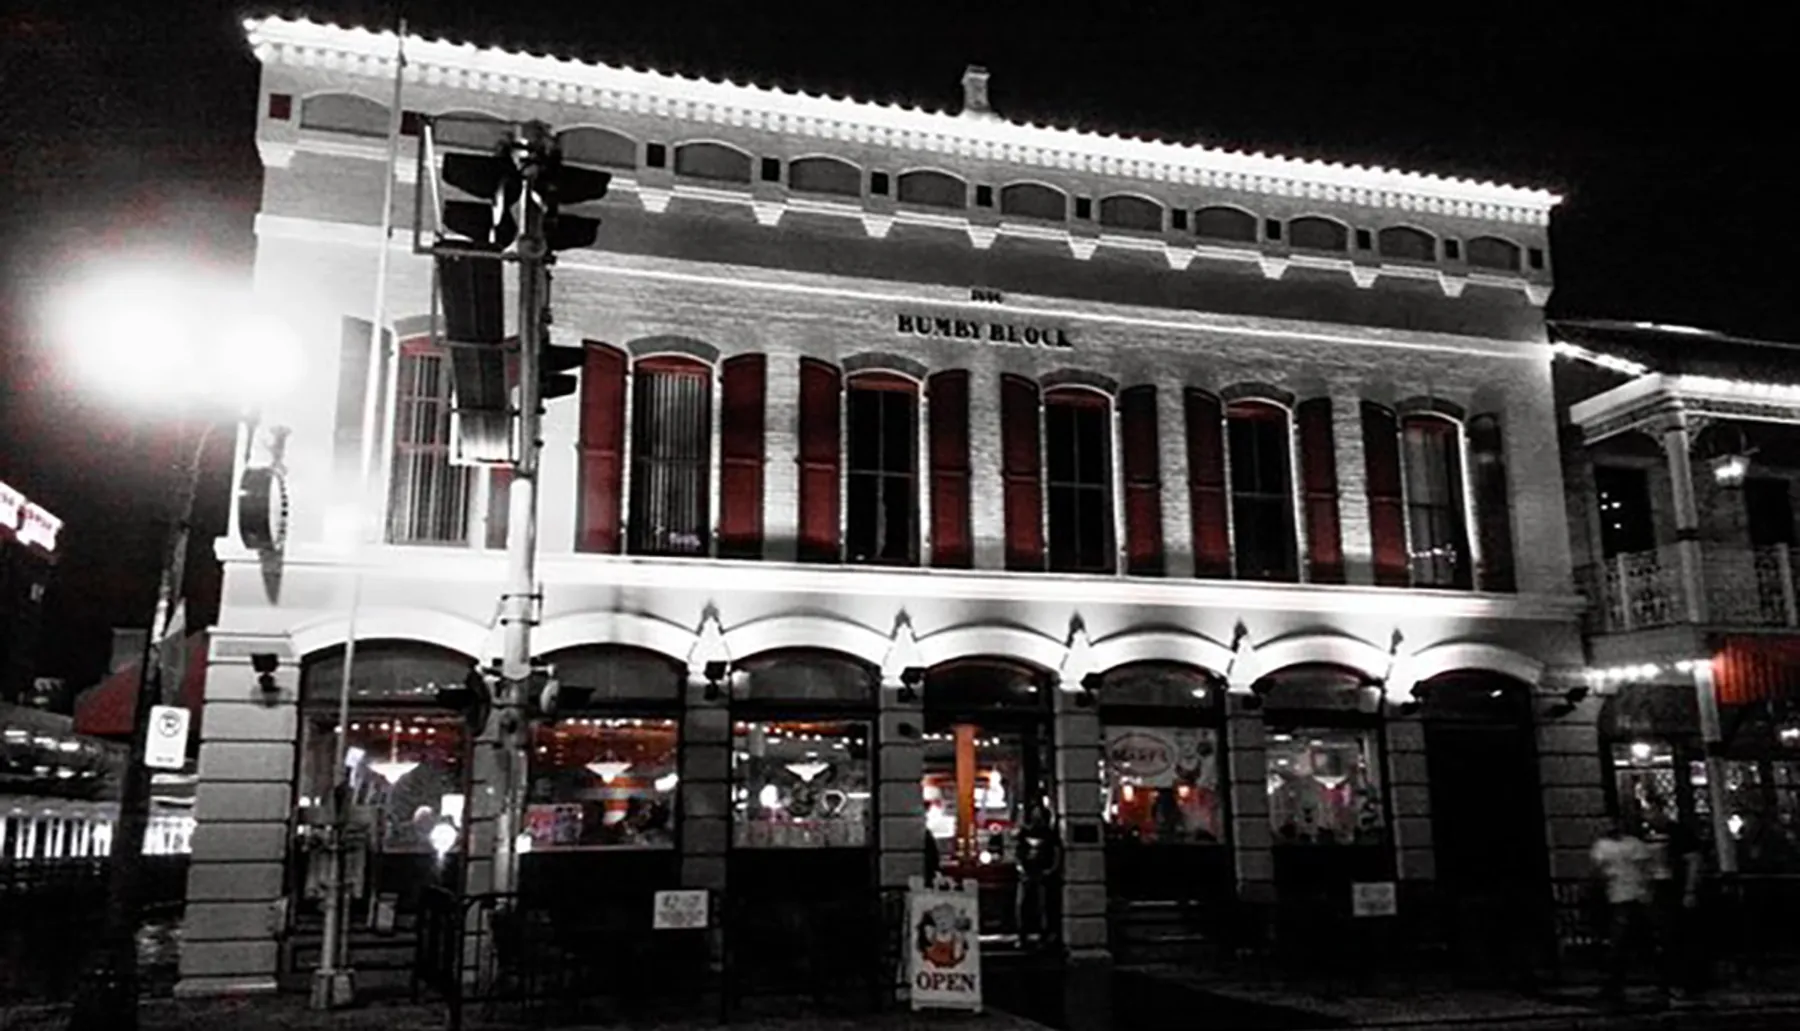 The image displays a two-story historic brick building with arched windows and a sign that reads HUMBY BLOCK at night, illuminated by street lights, with a OPEN neon sign visible at the ground level establishments.